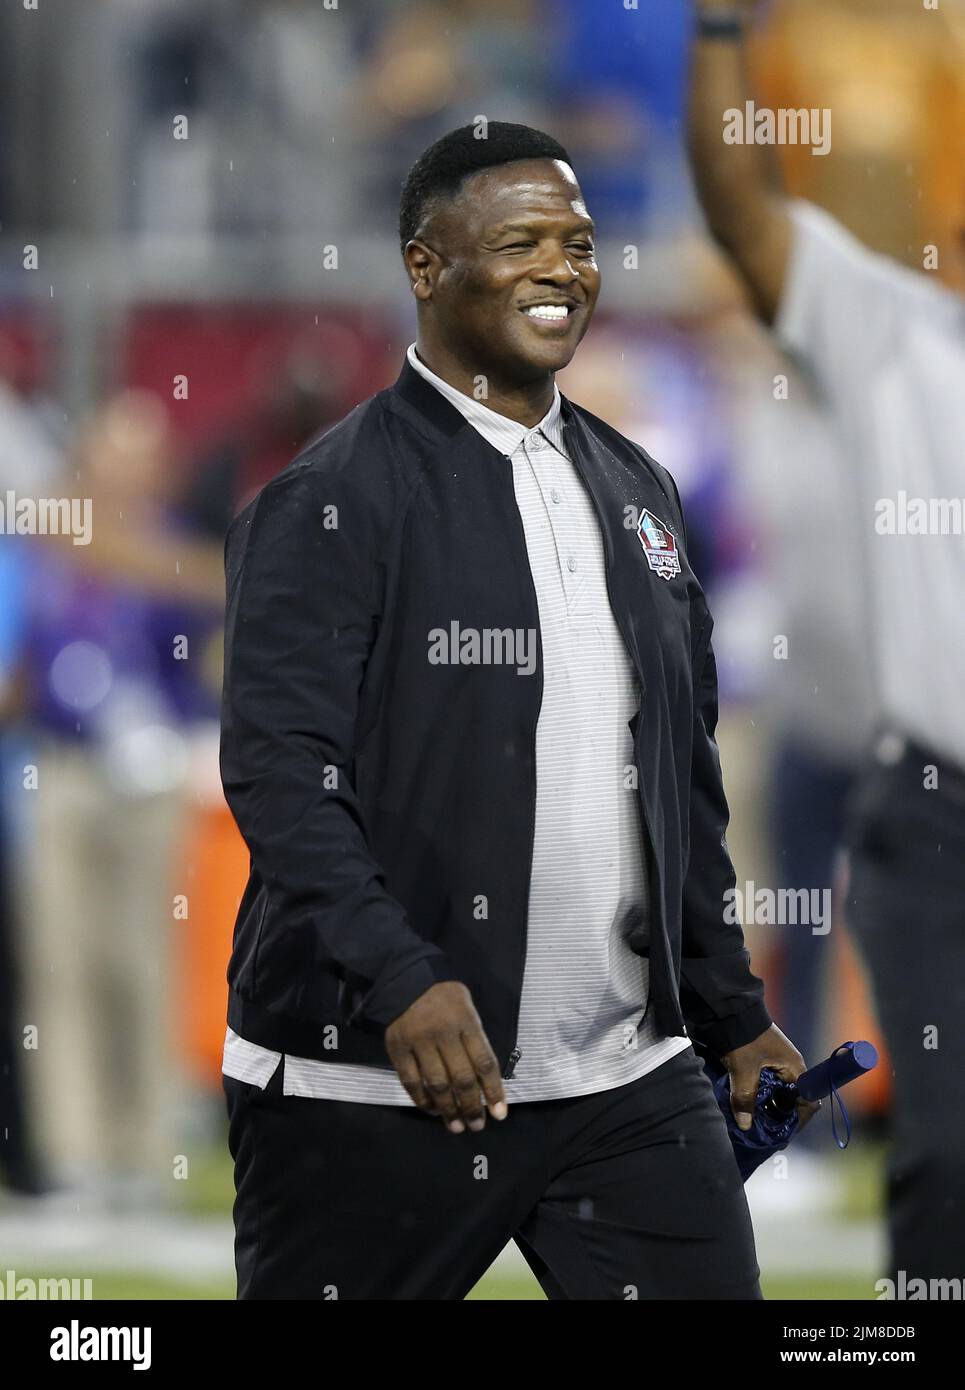 Canton, United States. 04th Aug, 2022. Pro Football Hall of Fame Class of 2022 Inductee, LeRoy Butler is introduced prior to the start of the Pro Football Hall of Game between the Las Vegas Raiders and Jacksonville Jaguars in Canton, Ohio, on Thursday, August 4, 2022. Photo by Aaron Josefczyk/UPI Credit: UPI/Alamy Live News Stock Photo